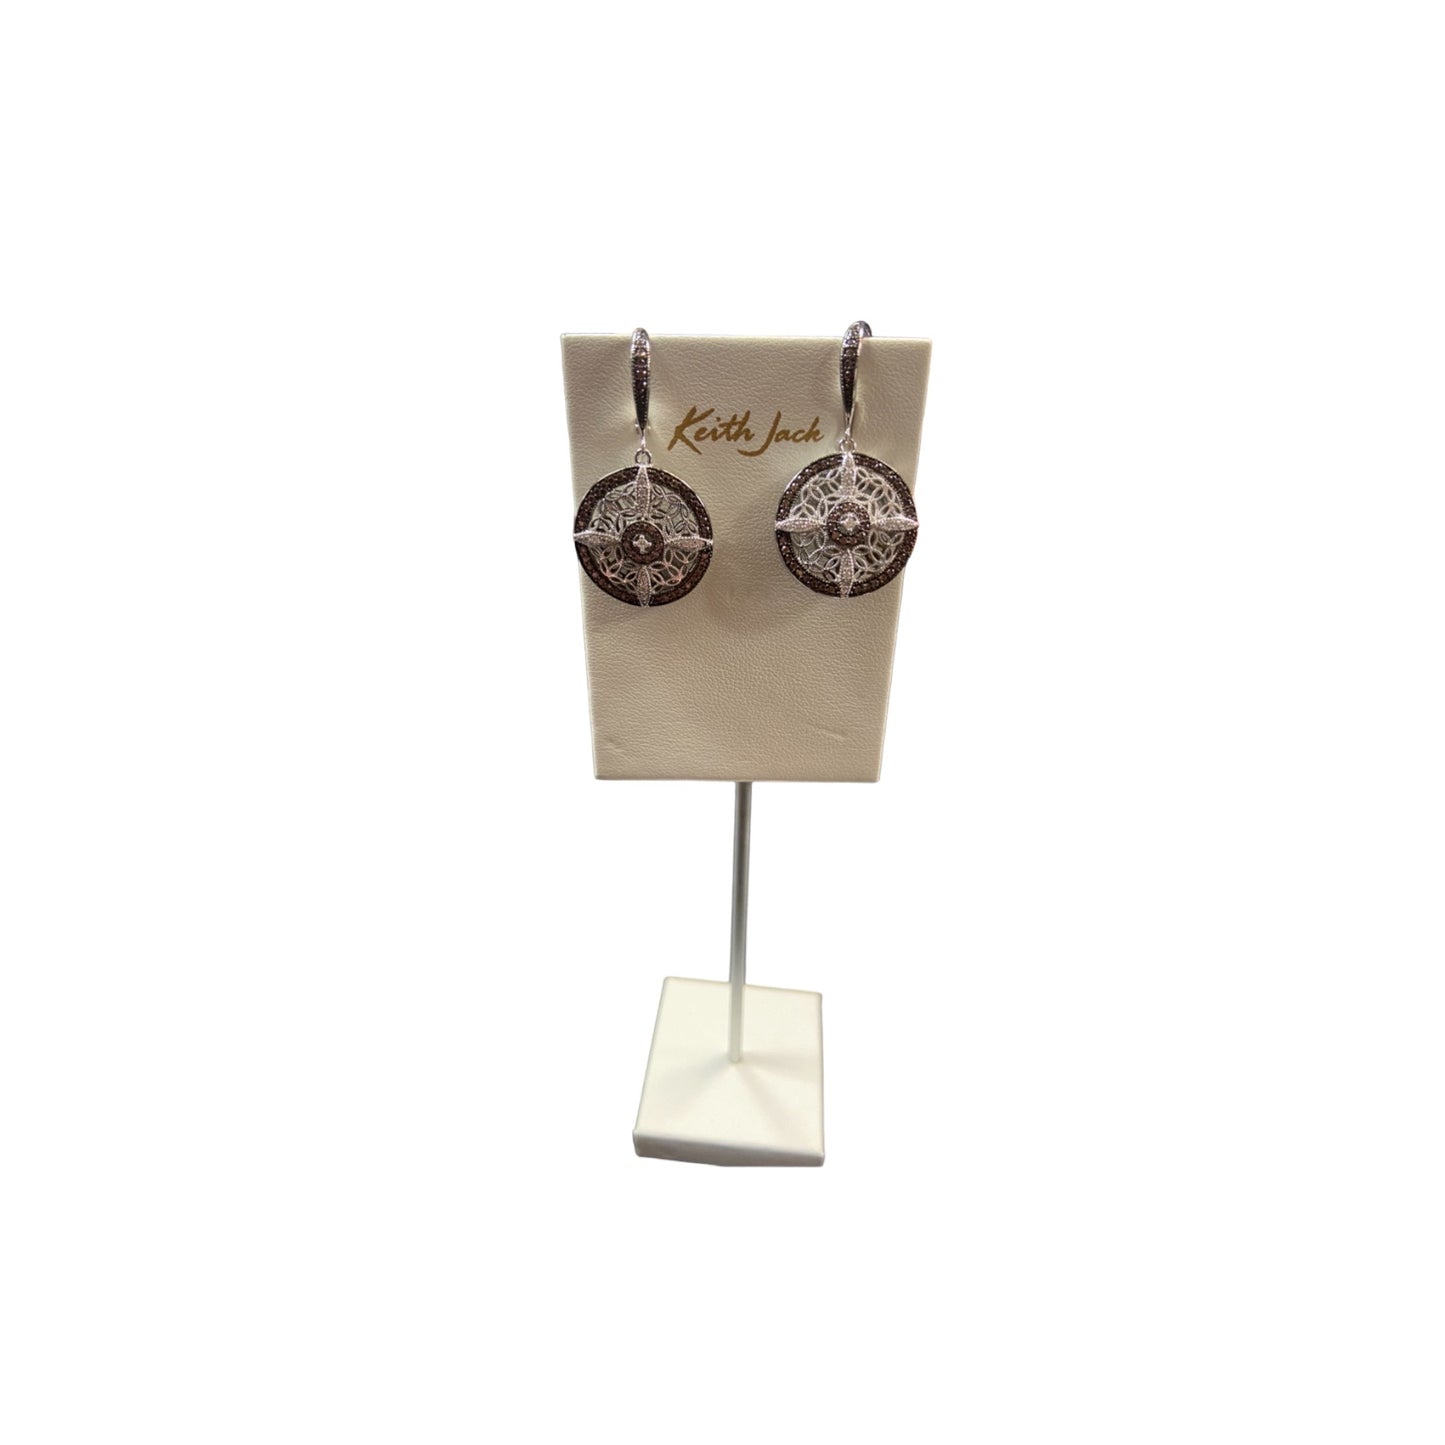 Keith Jack - Sterling Silver and CZ Night & Day Round Leverback Earrings